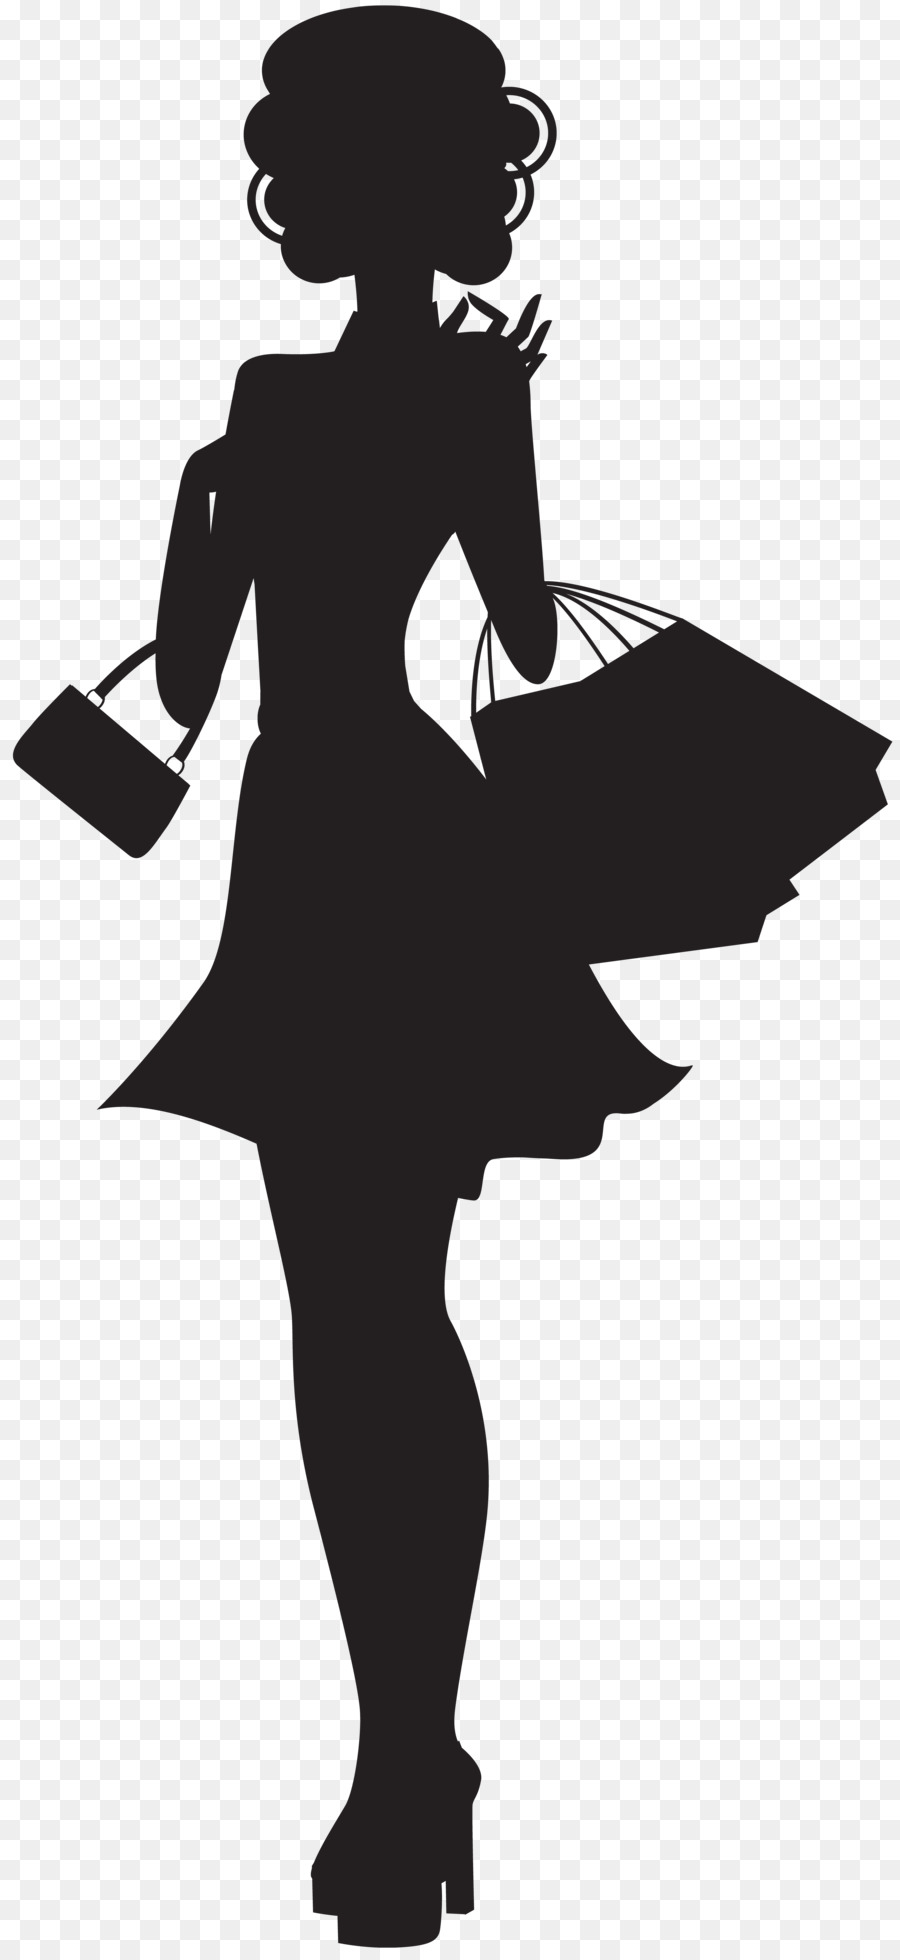 Woman Drawing Silhouette Clip art - thinking woman png download - 3681*8000 - Free Transparent Woman png Download.